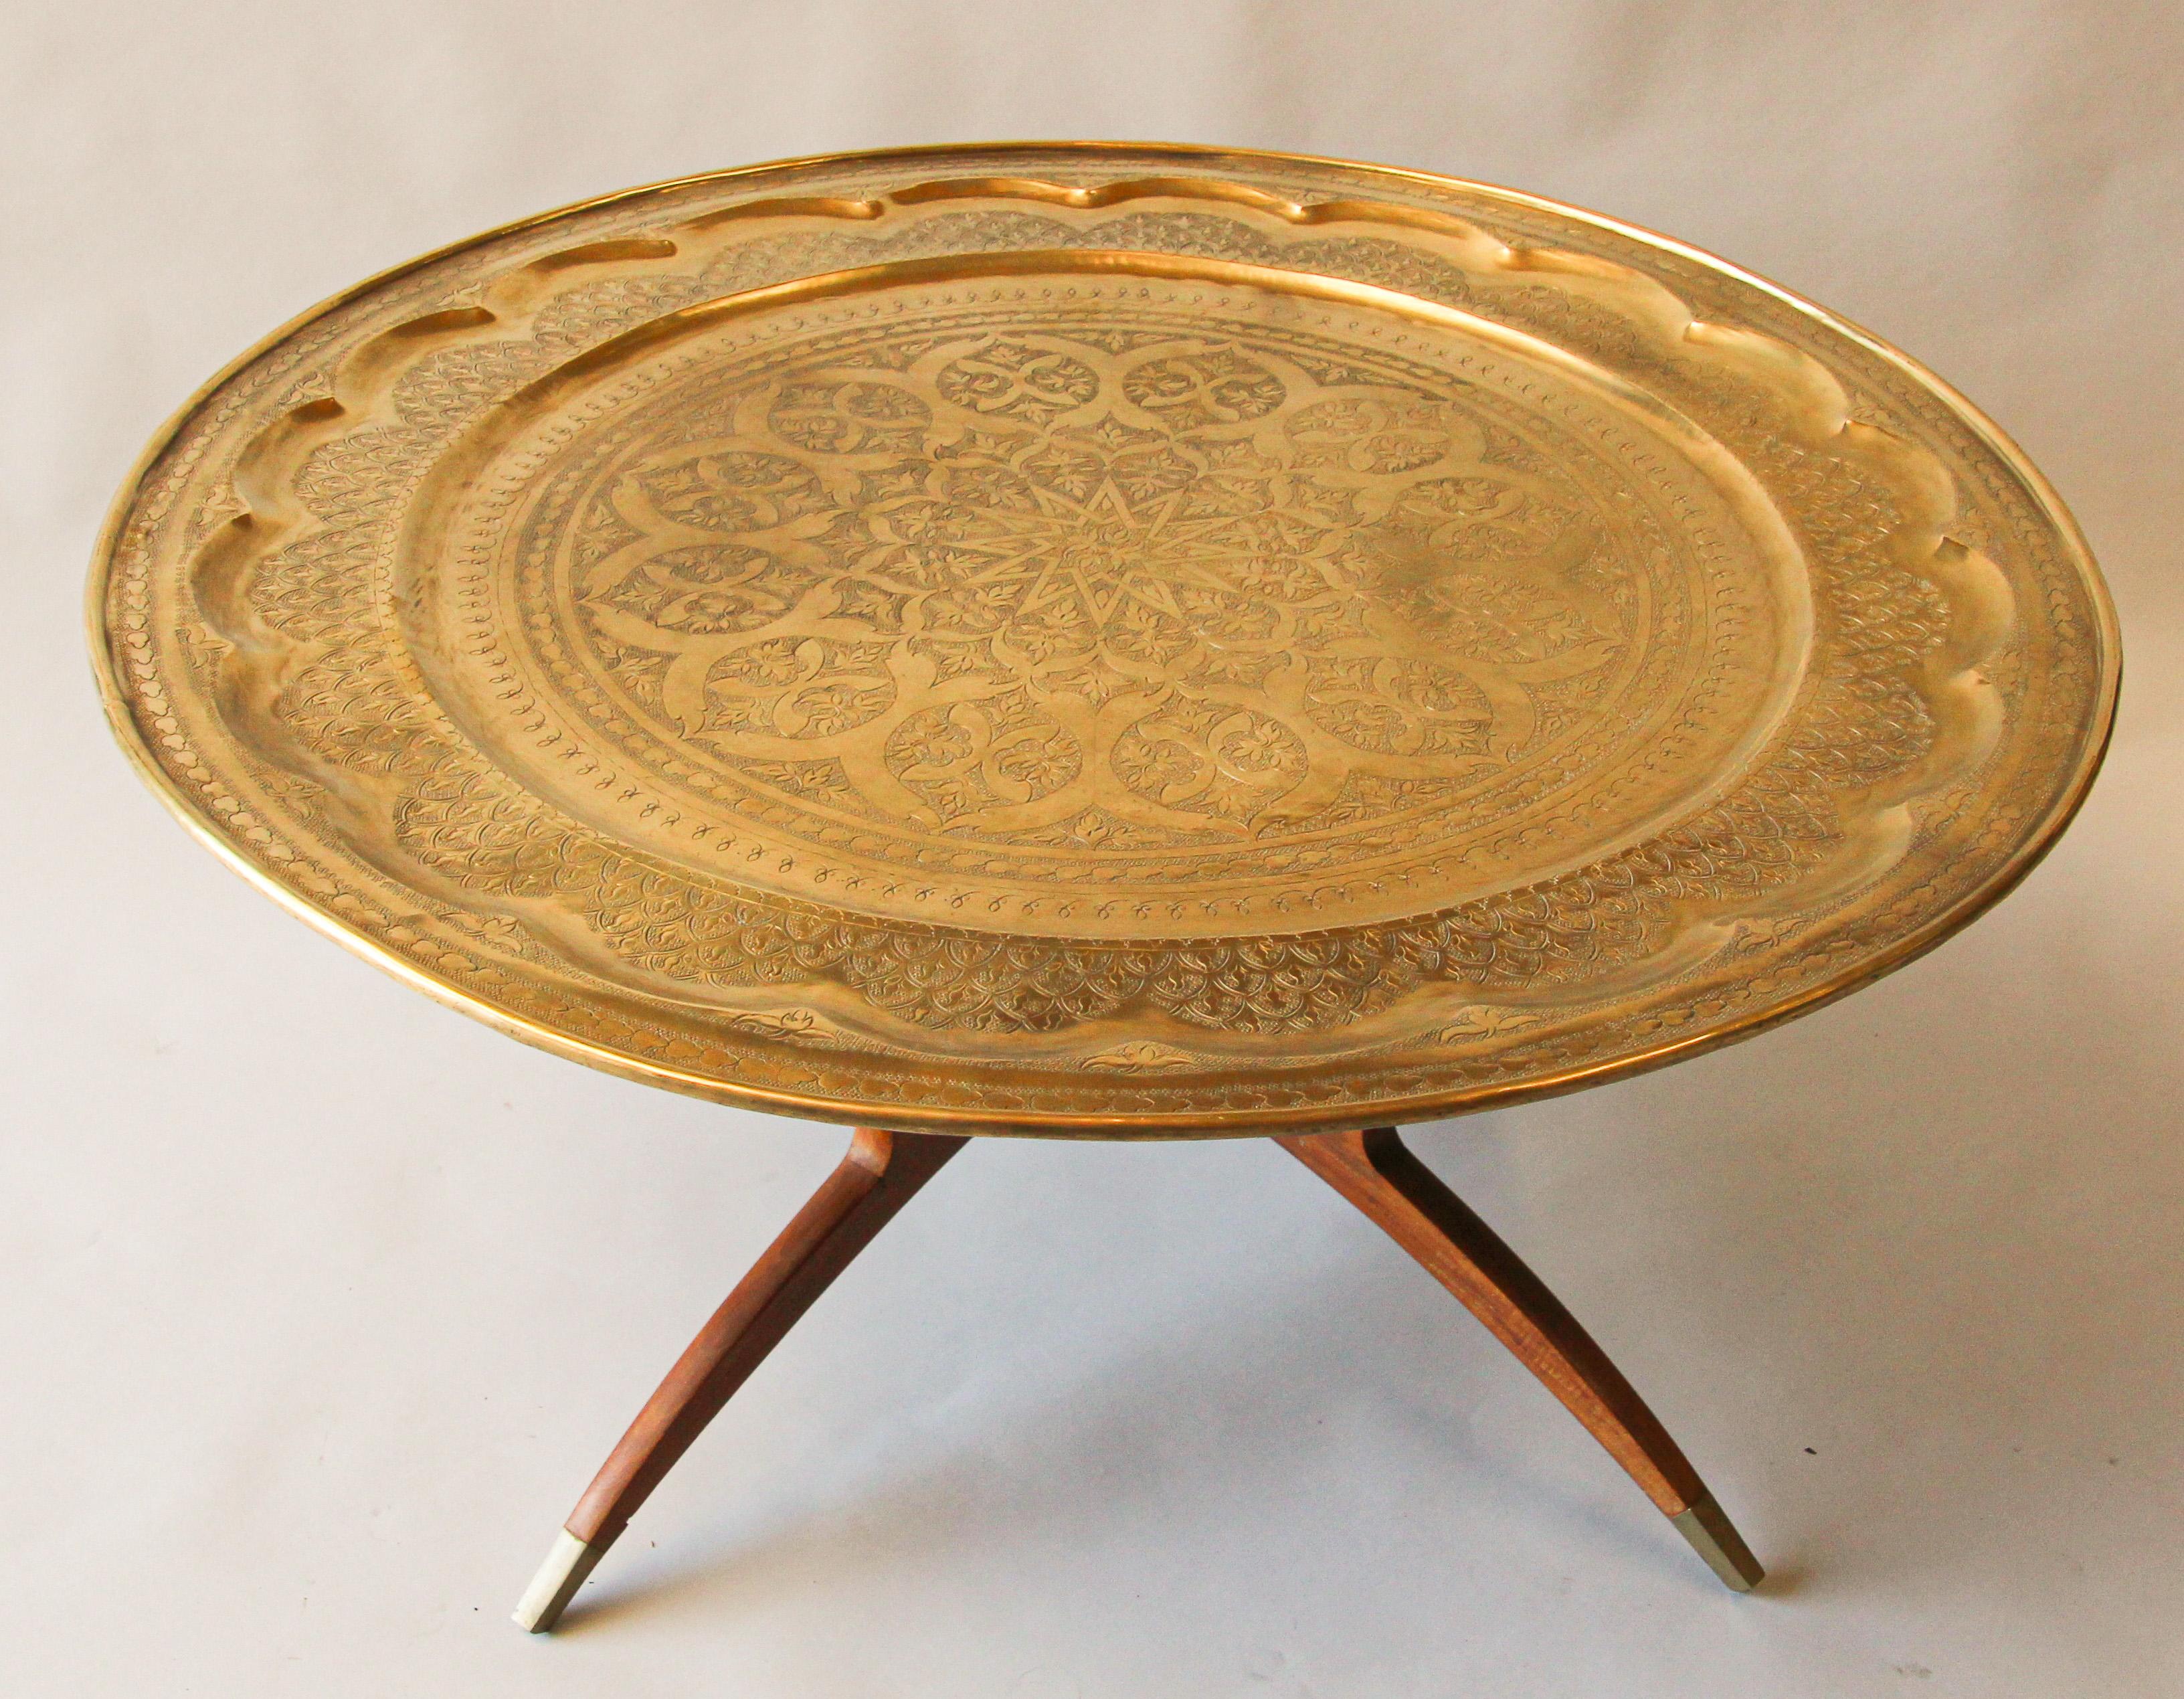 Hammered Large Moroccan Moorish Round Brass Tray Table on Folding Stand